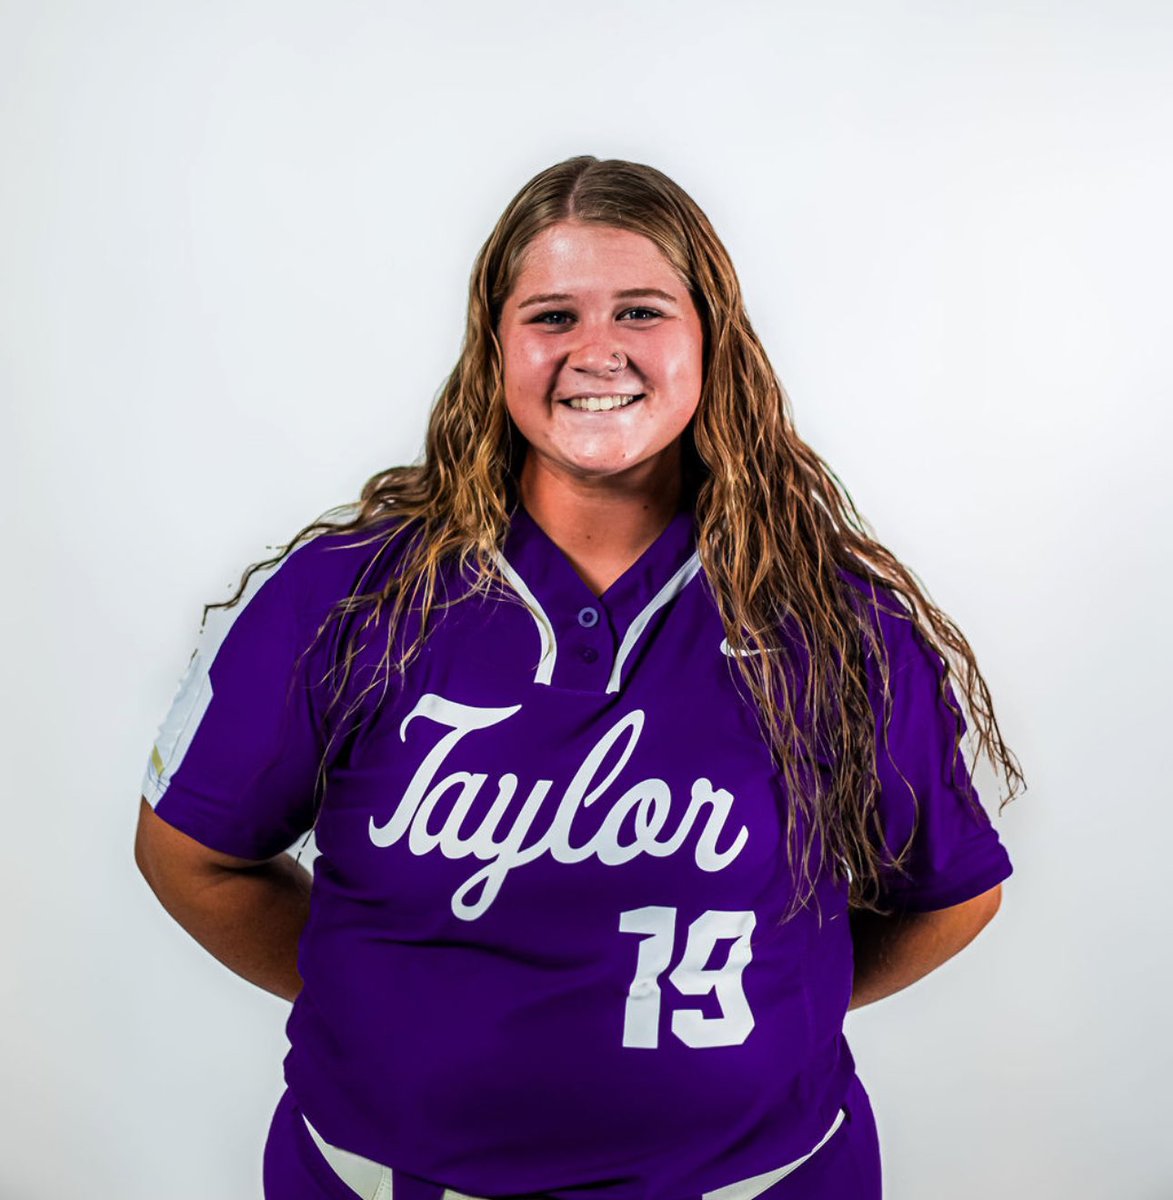 It’s officially 19 days until our first game day! Up next in our team introductions is Sophomore #19 Kaylee Larkin! Kaylee loves popcorn, pepperoni and blue raspberry lemonade!! Her favorite Bible verse is Philippians 4:13!